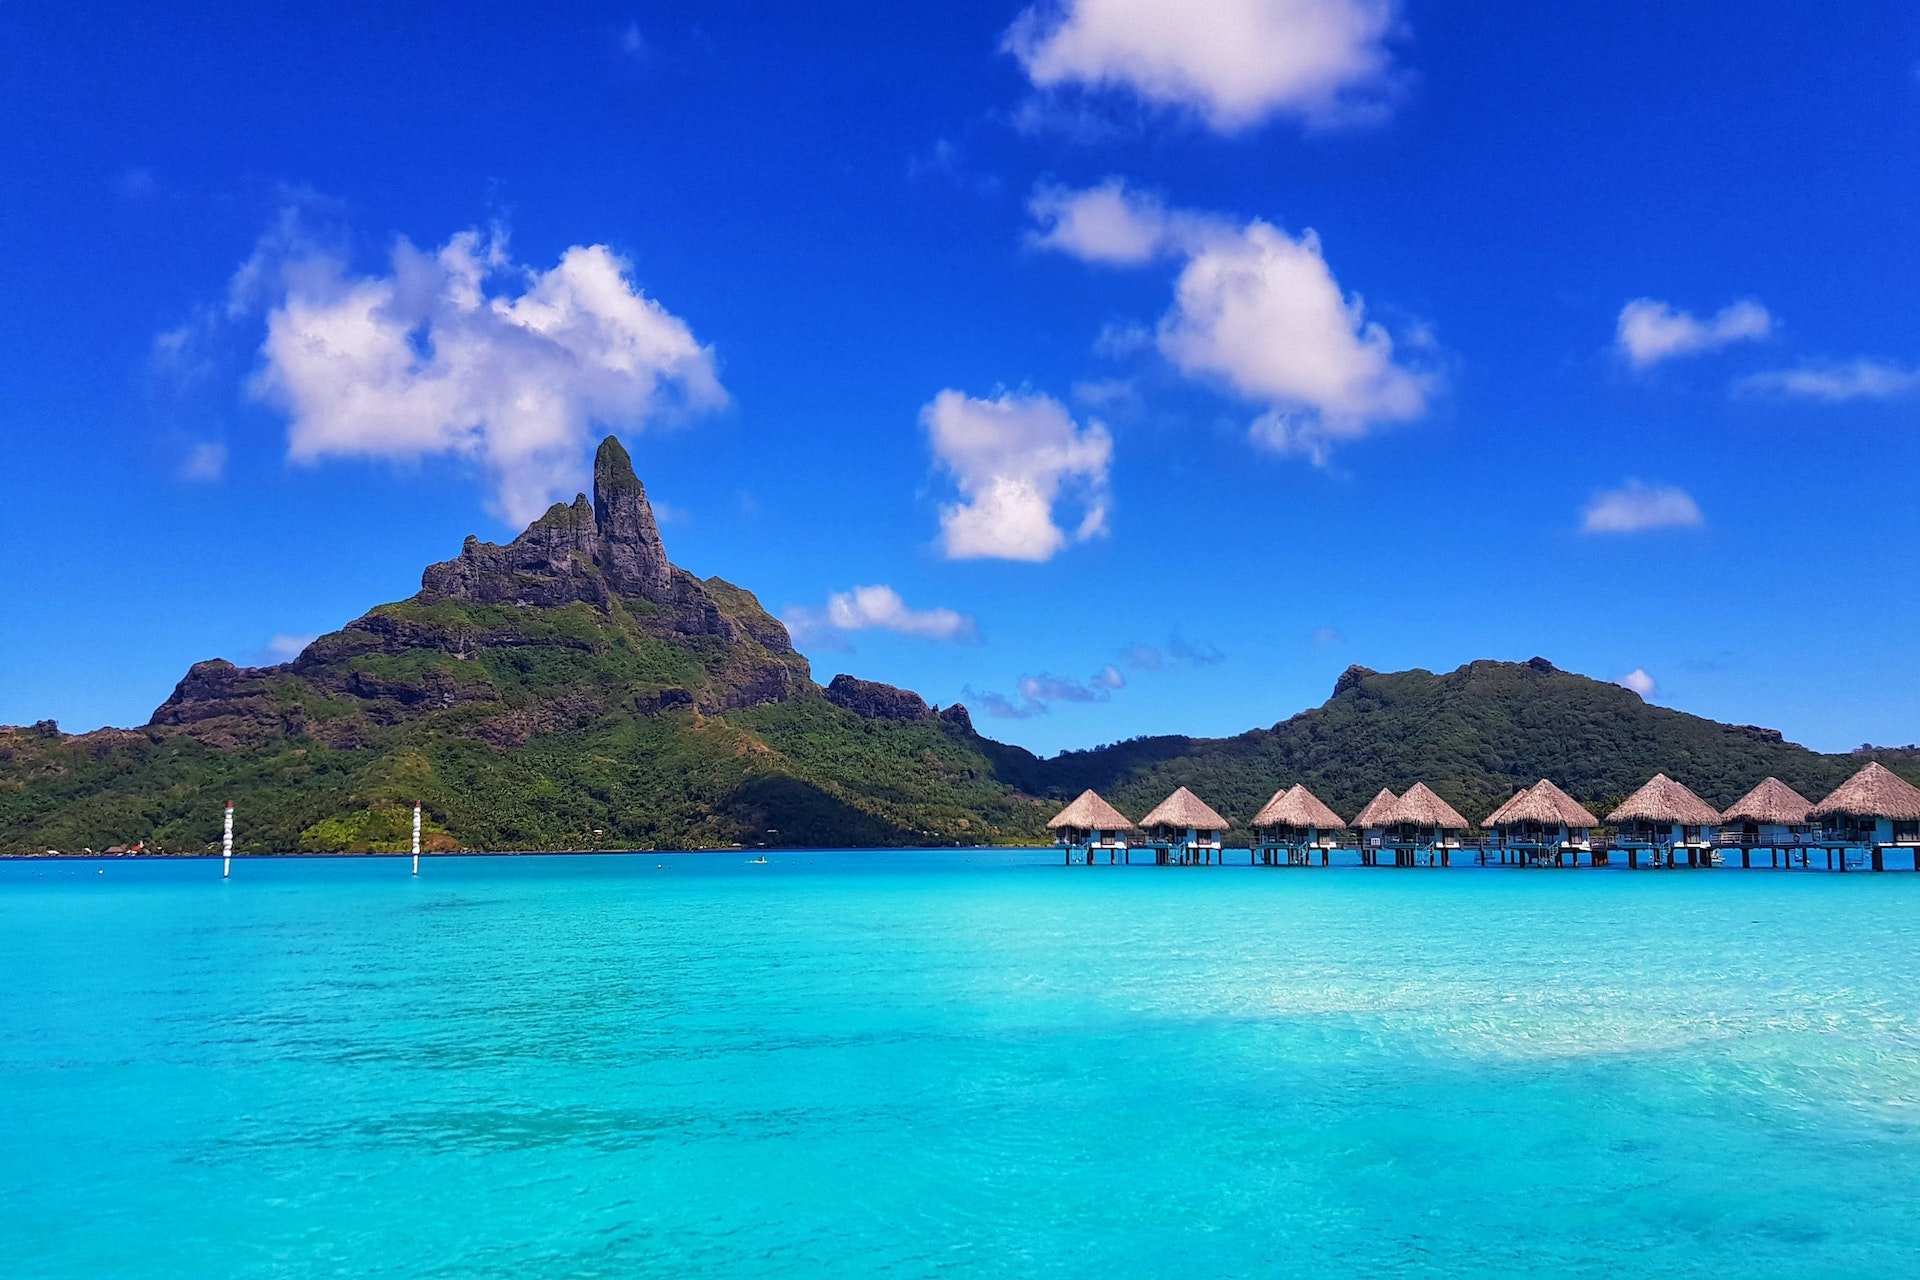 100 most beautiful islands in the world